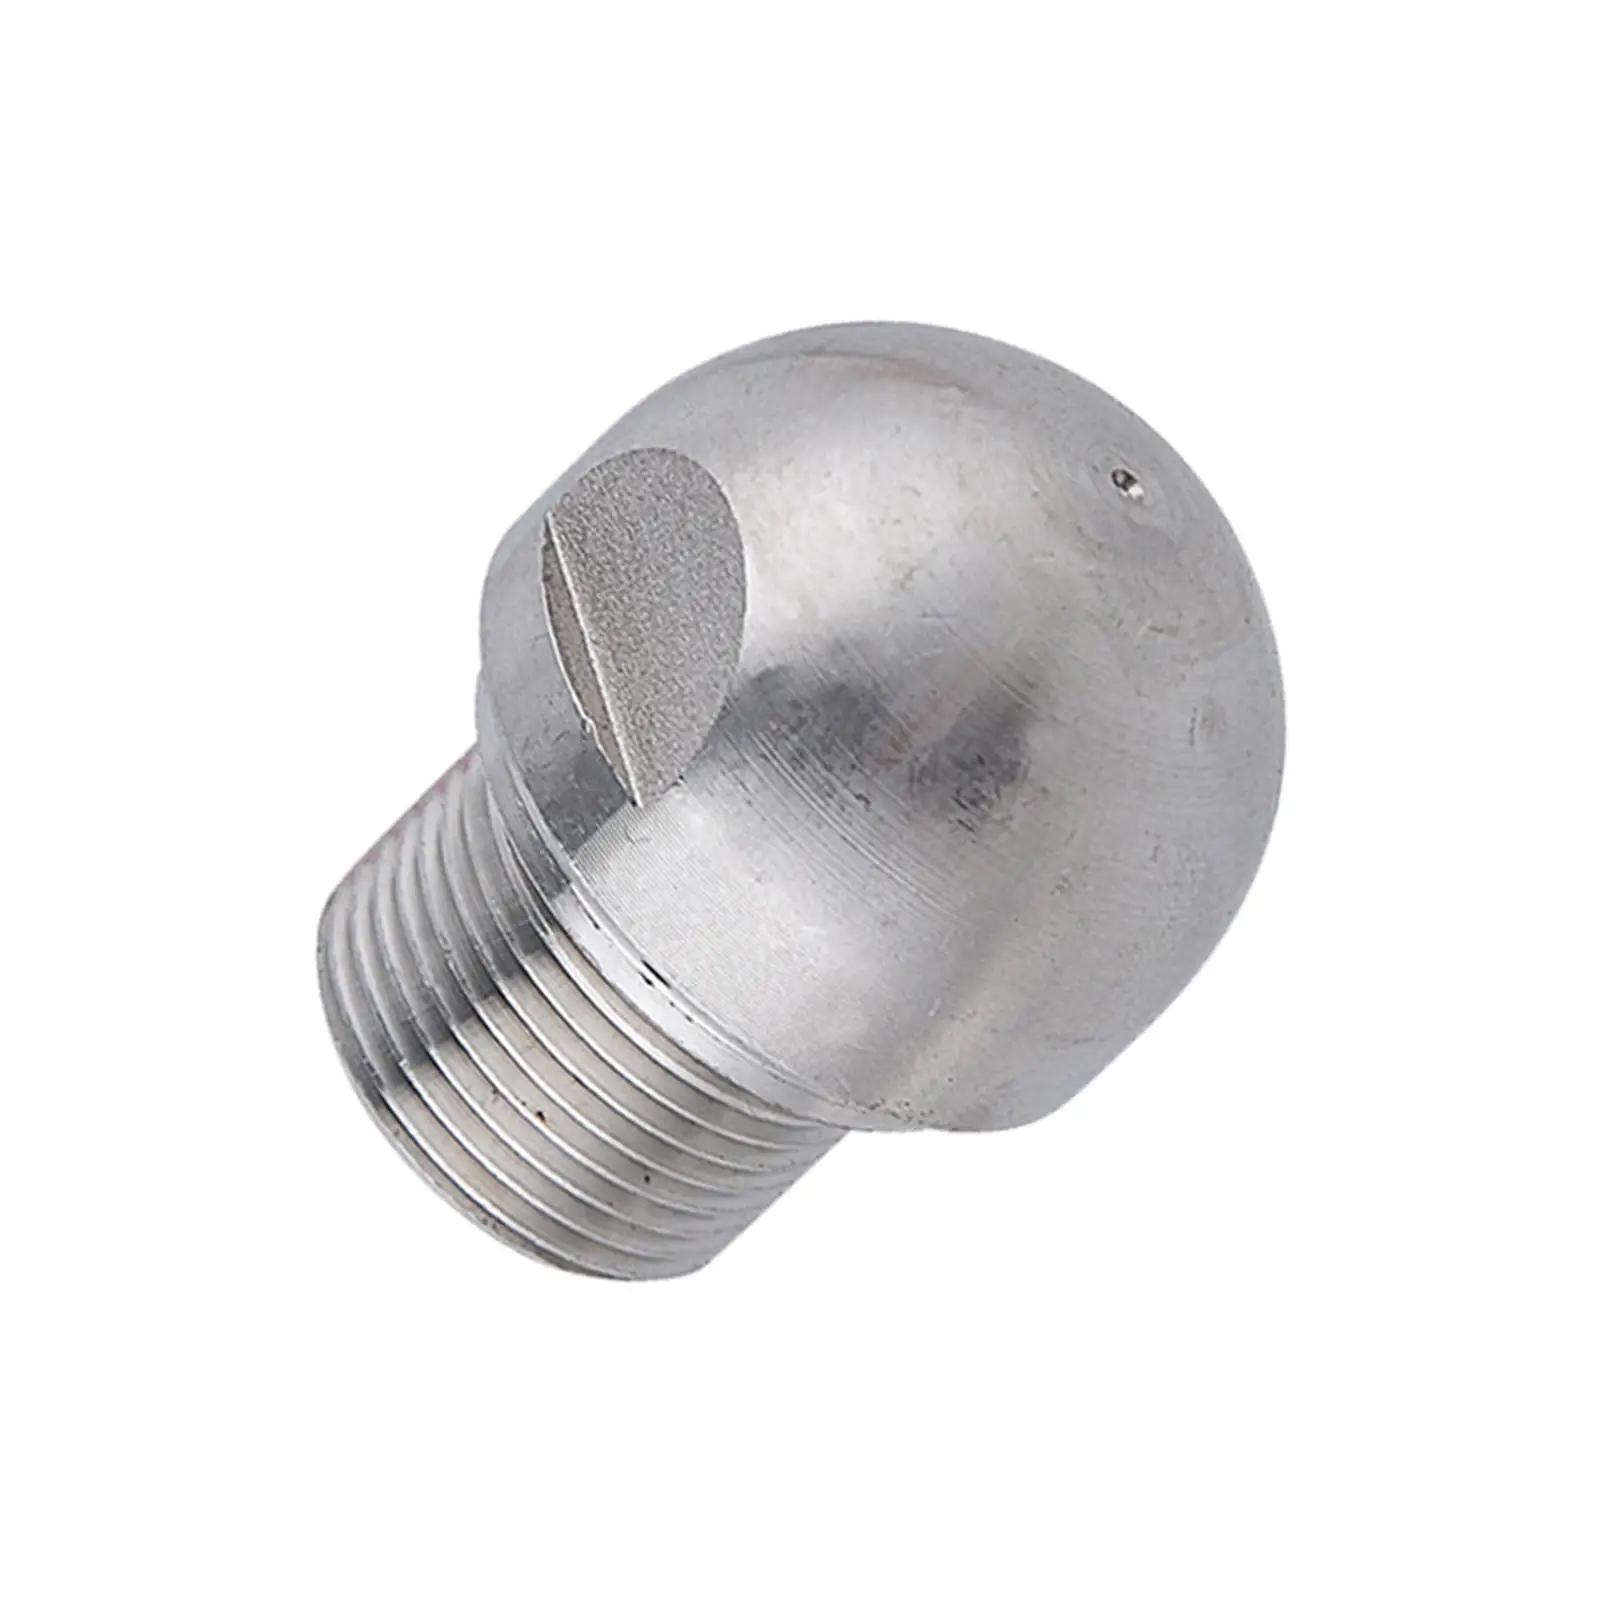 Rotating Button Nose Sewer Jetting Nozzle Pressure up to 300Bar 1/4`` Quick Connect for Sewer Pressure Washer Accessories